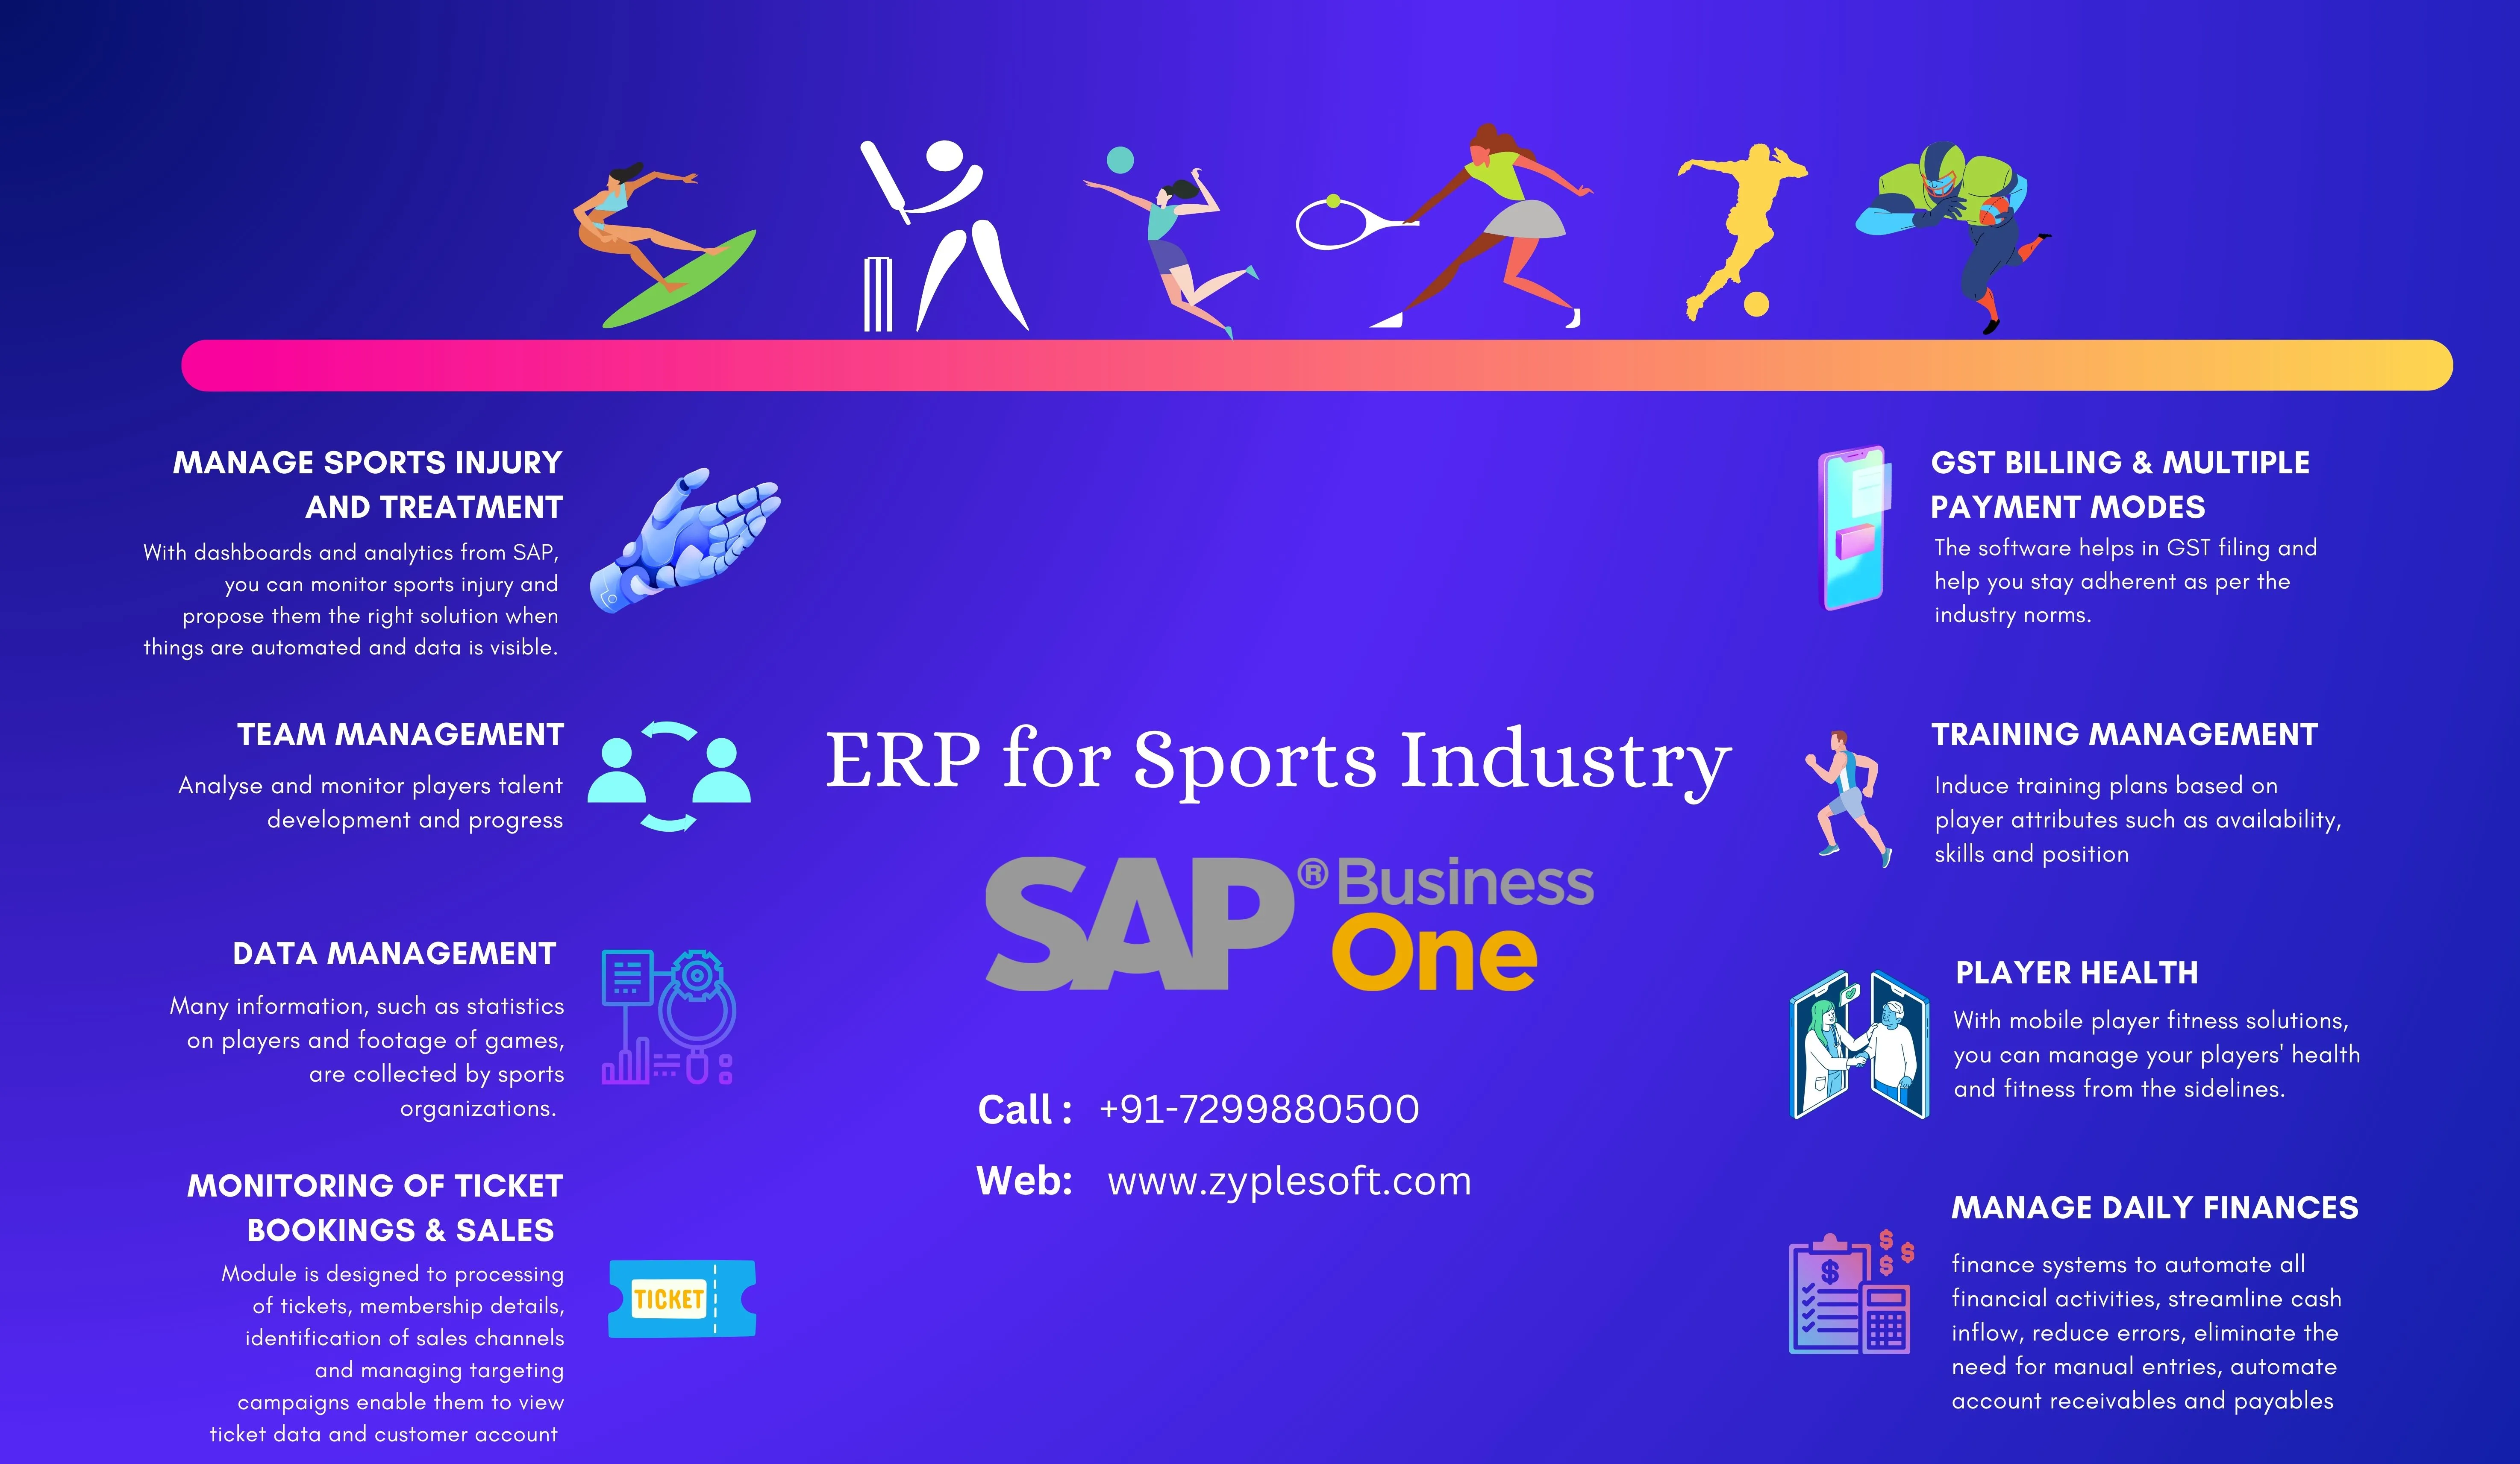 SAP Business One ERP for sports industry